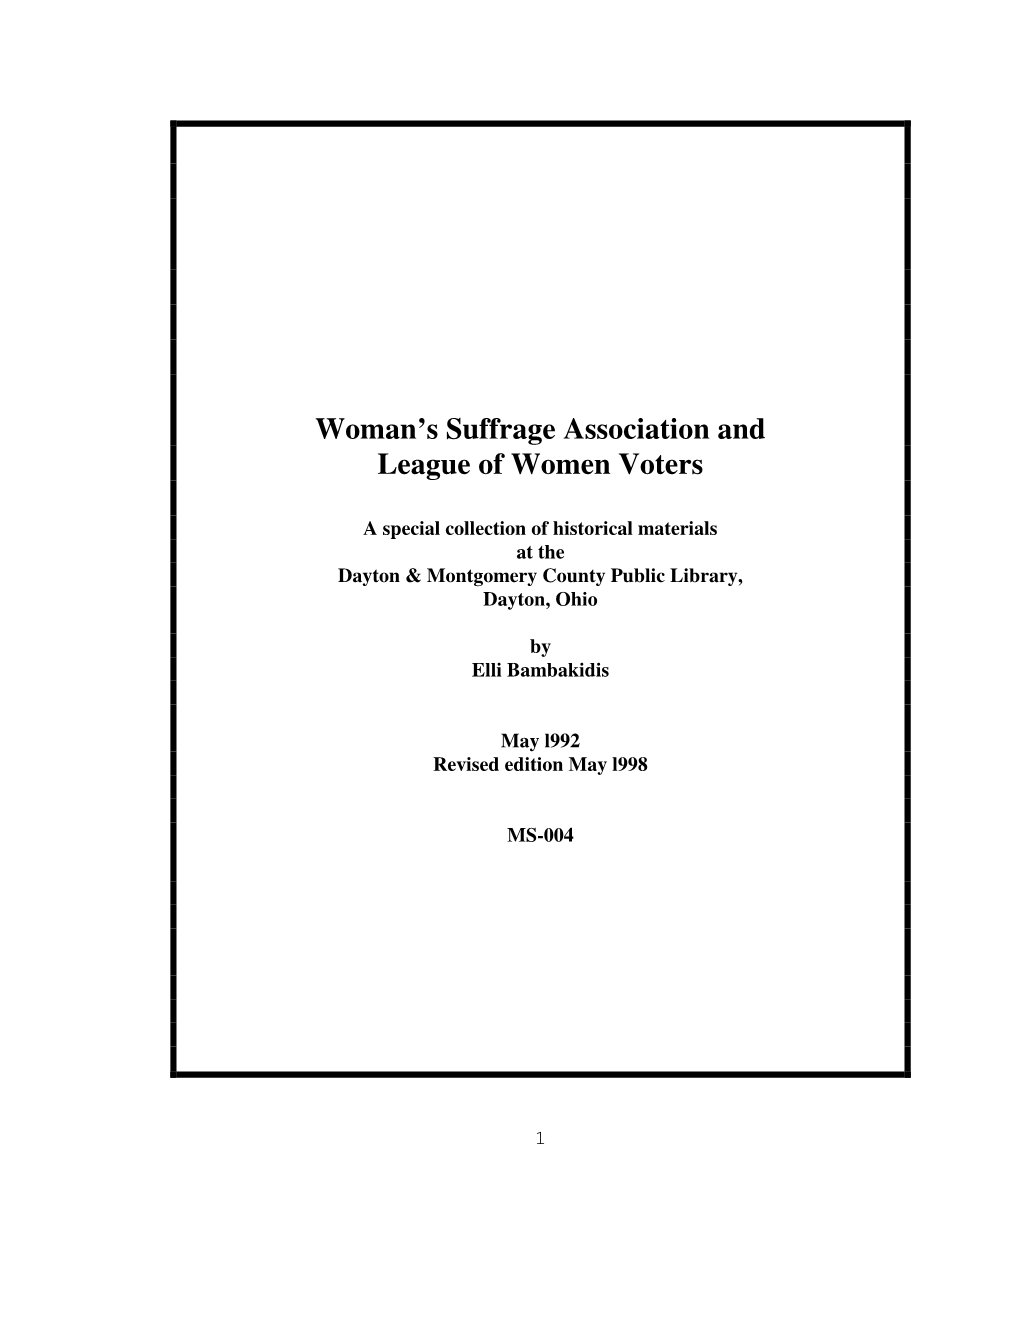 Woman's Suffrage Association and League of Women Voters